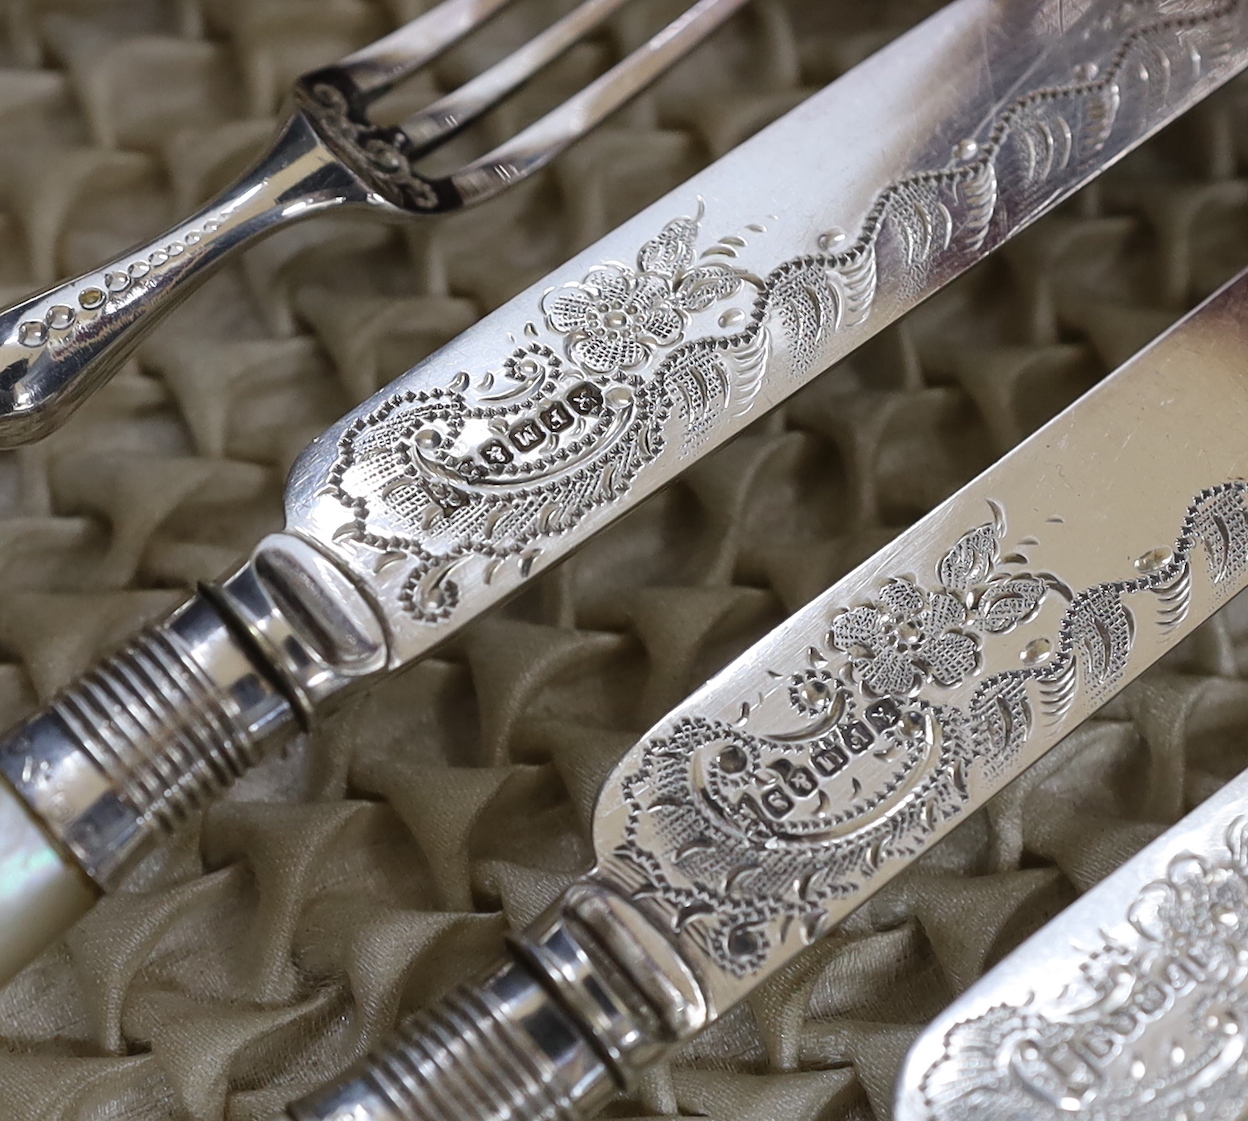 An Edwardian cased set of mother of pearl handled plated dessert knives and forks with silver collars, Sheffield 1901